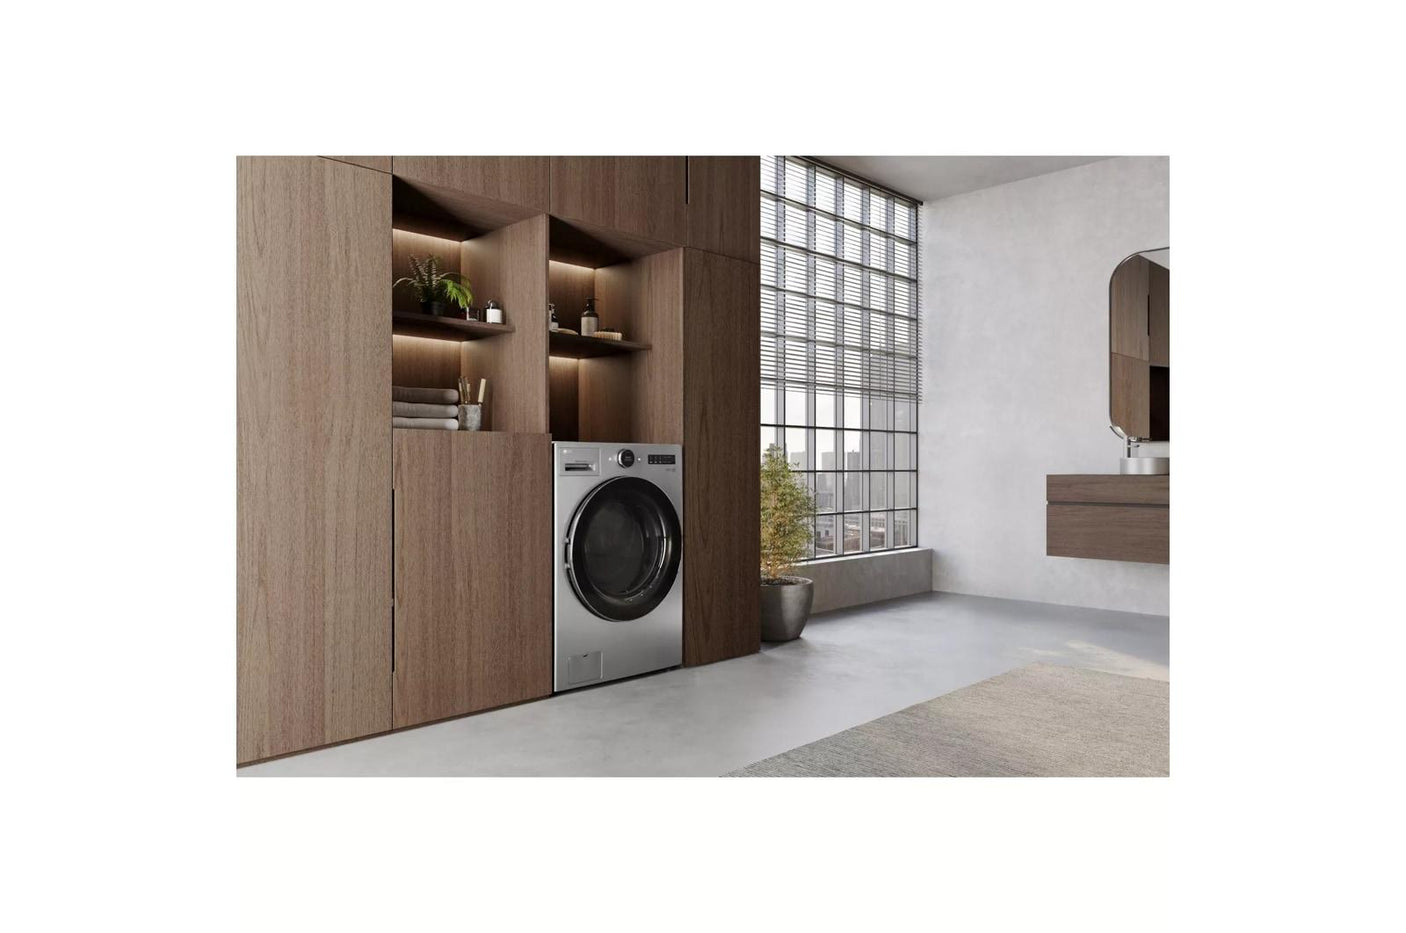 Ventless Washer/Dryer Combo LG WashCombo™ All-in-One 5.0 cu. ft. Mega Capacity with Inverter HeatPump™ Technology and Direct Drive Motor